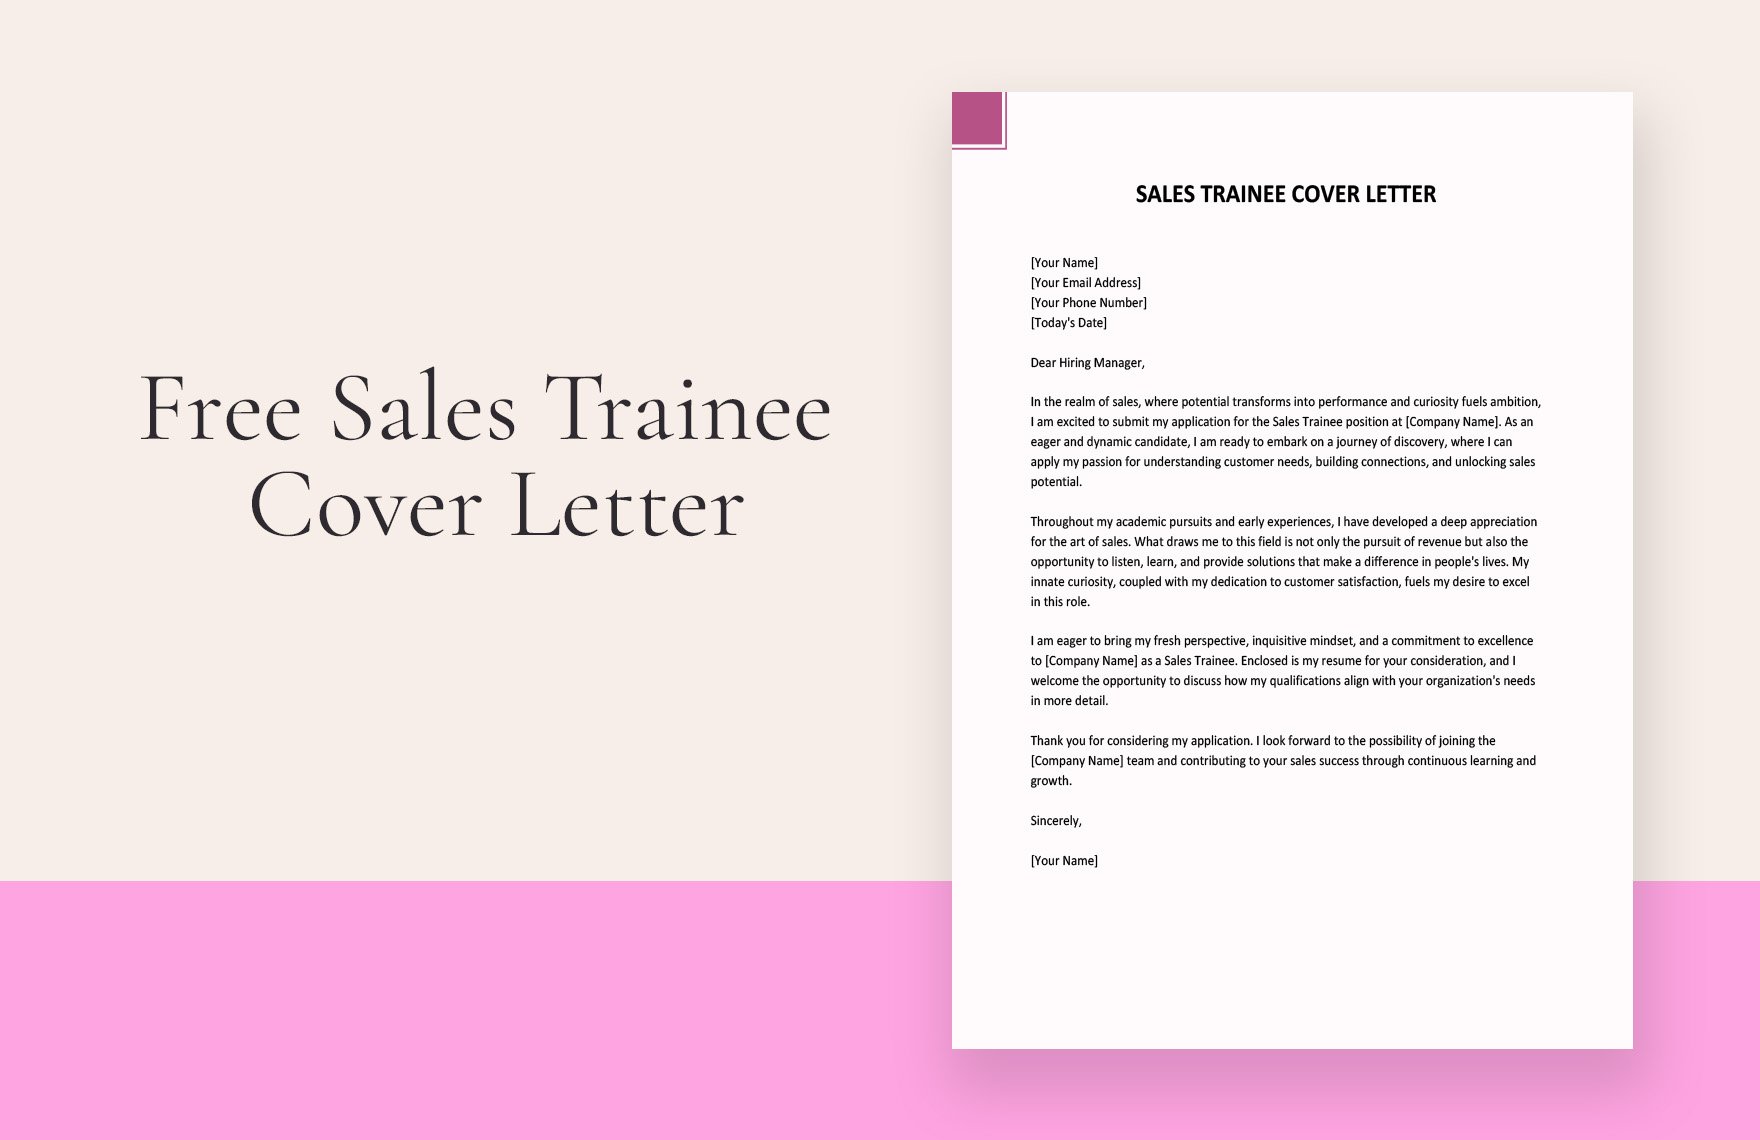 Sales Trainee Cover Letter